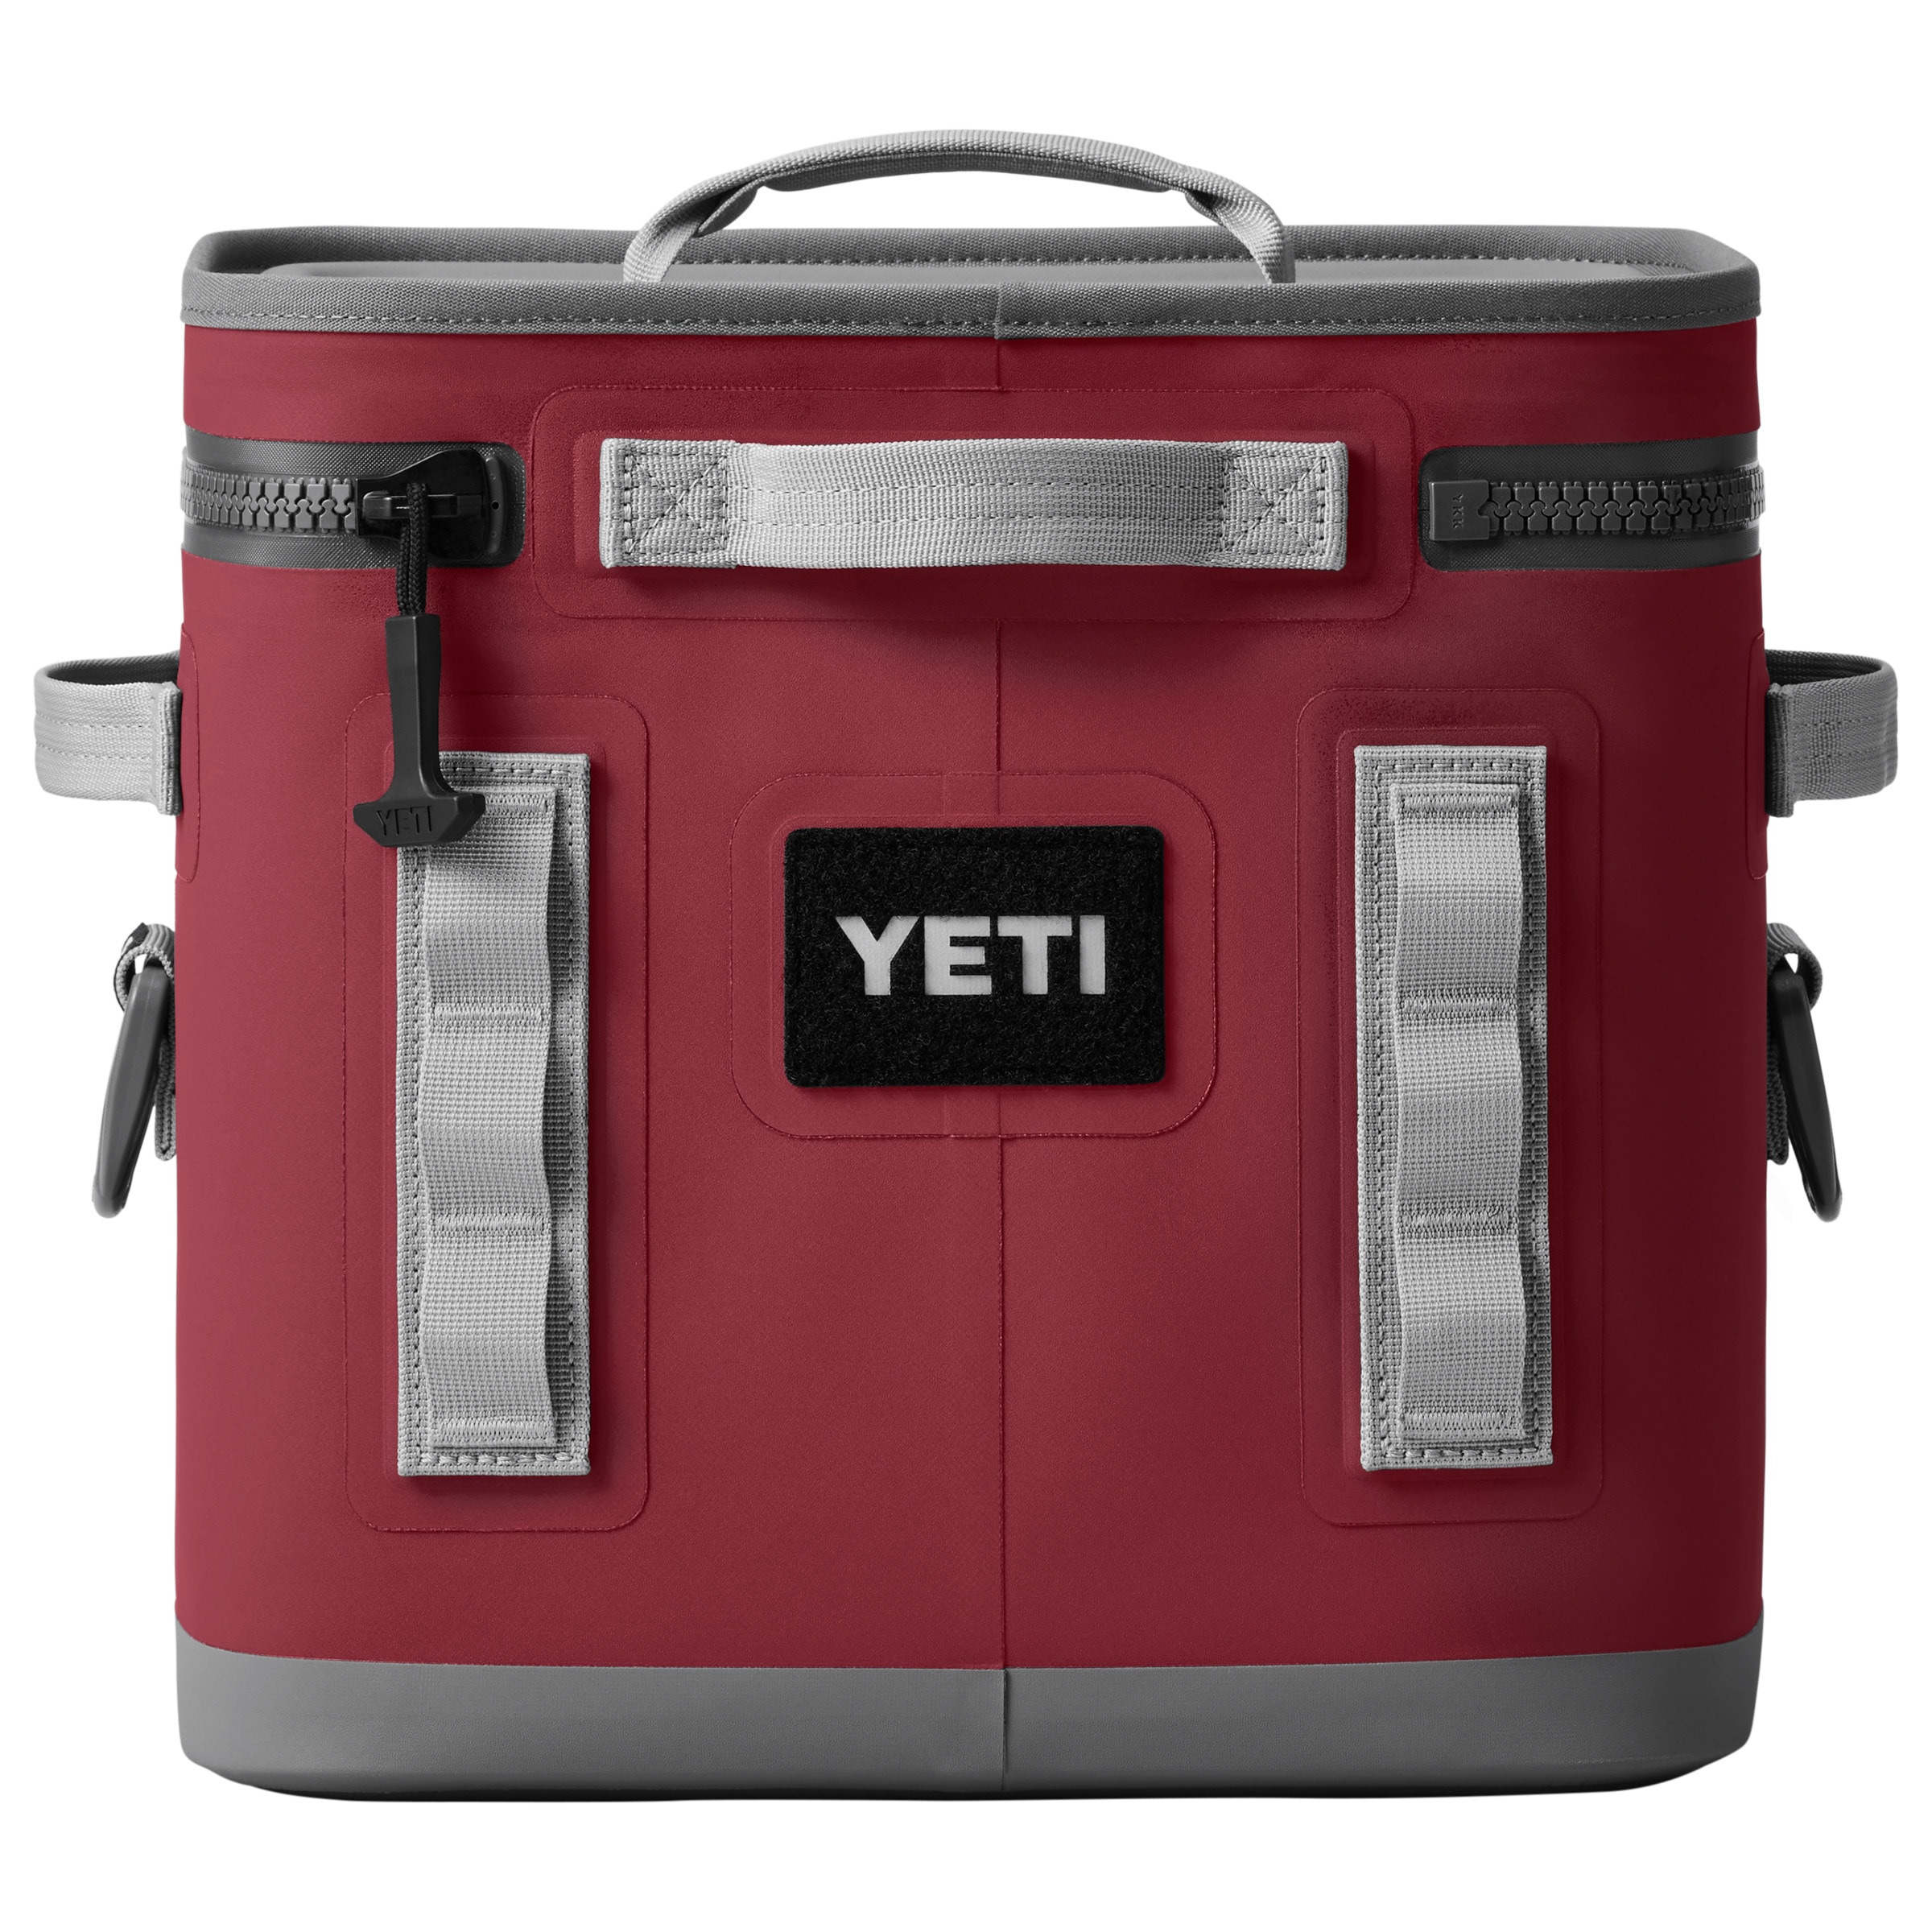 NEW YETI Tundra 65 Cooler TAN Custom RED Logo Handles Latches Complete Box  Gift